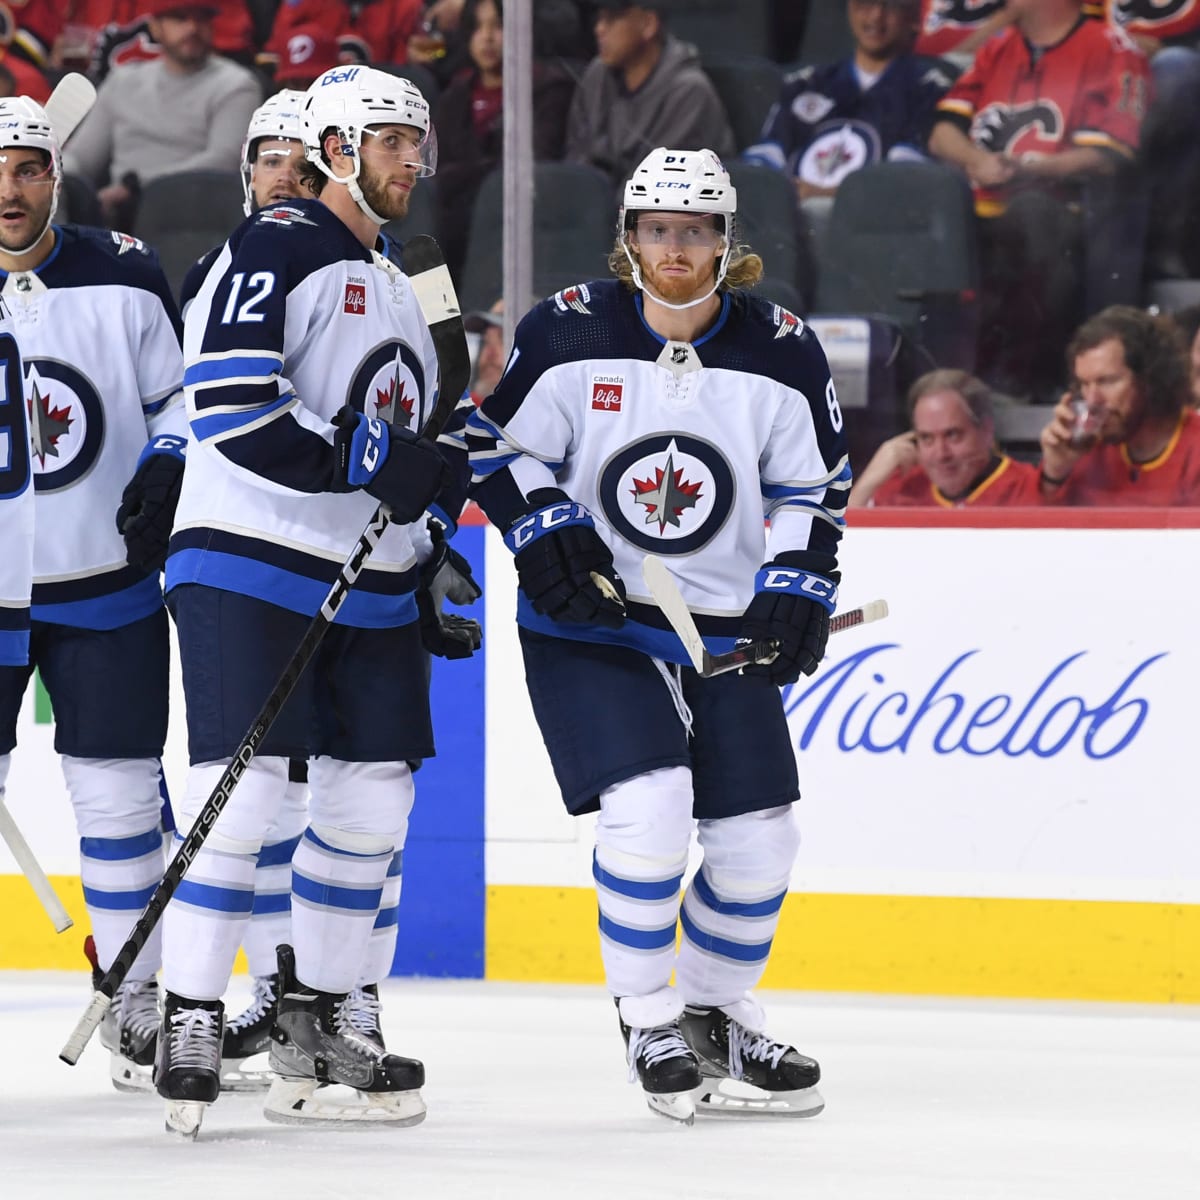 Mark Scheifele tries to win spot in Jets' lineup after another year in  junior - Victoria Times Colonist